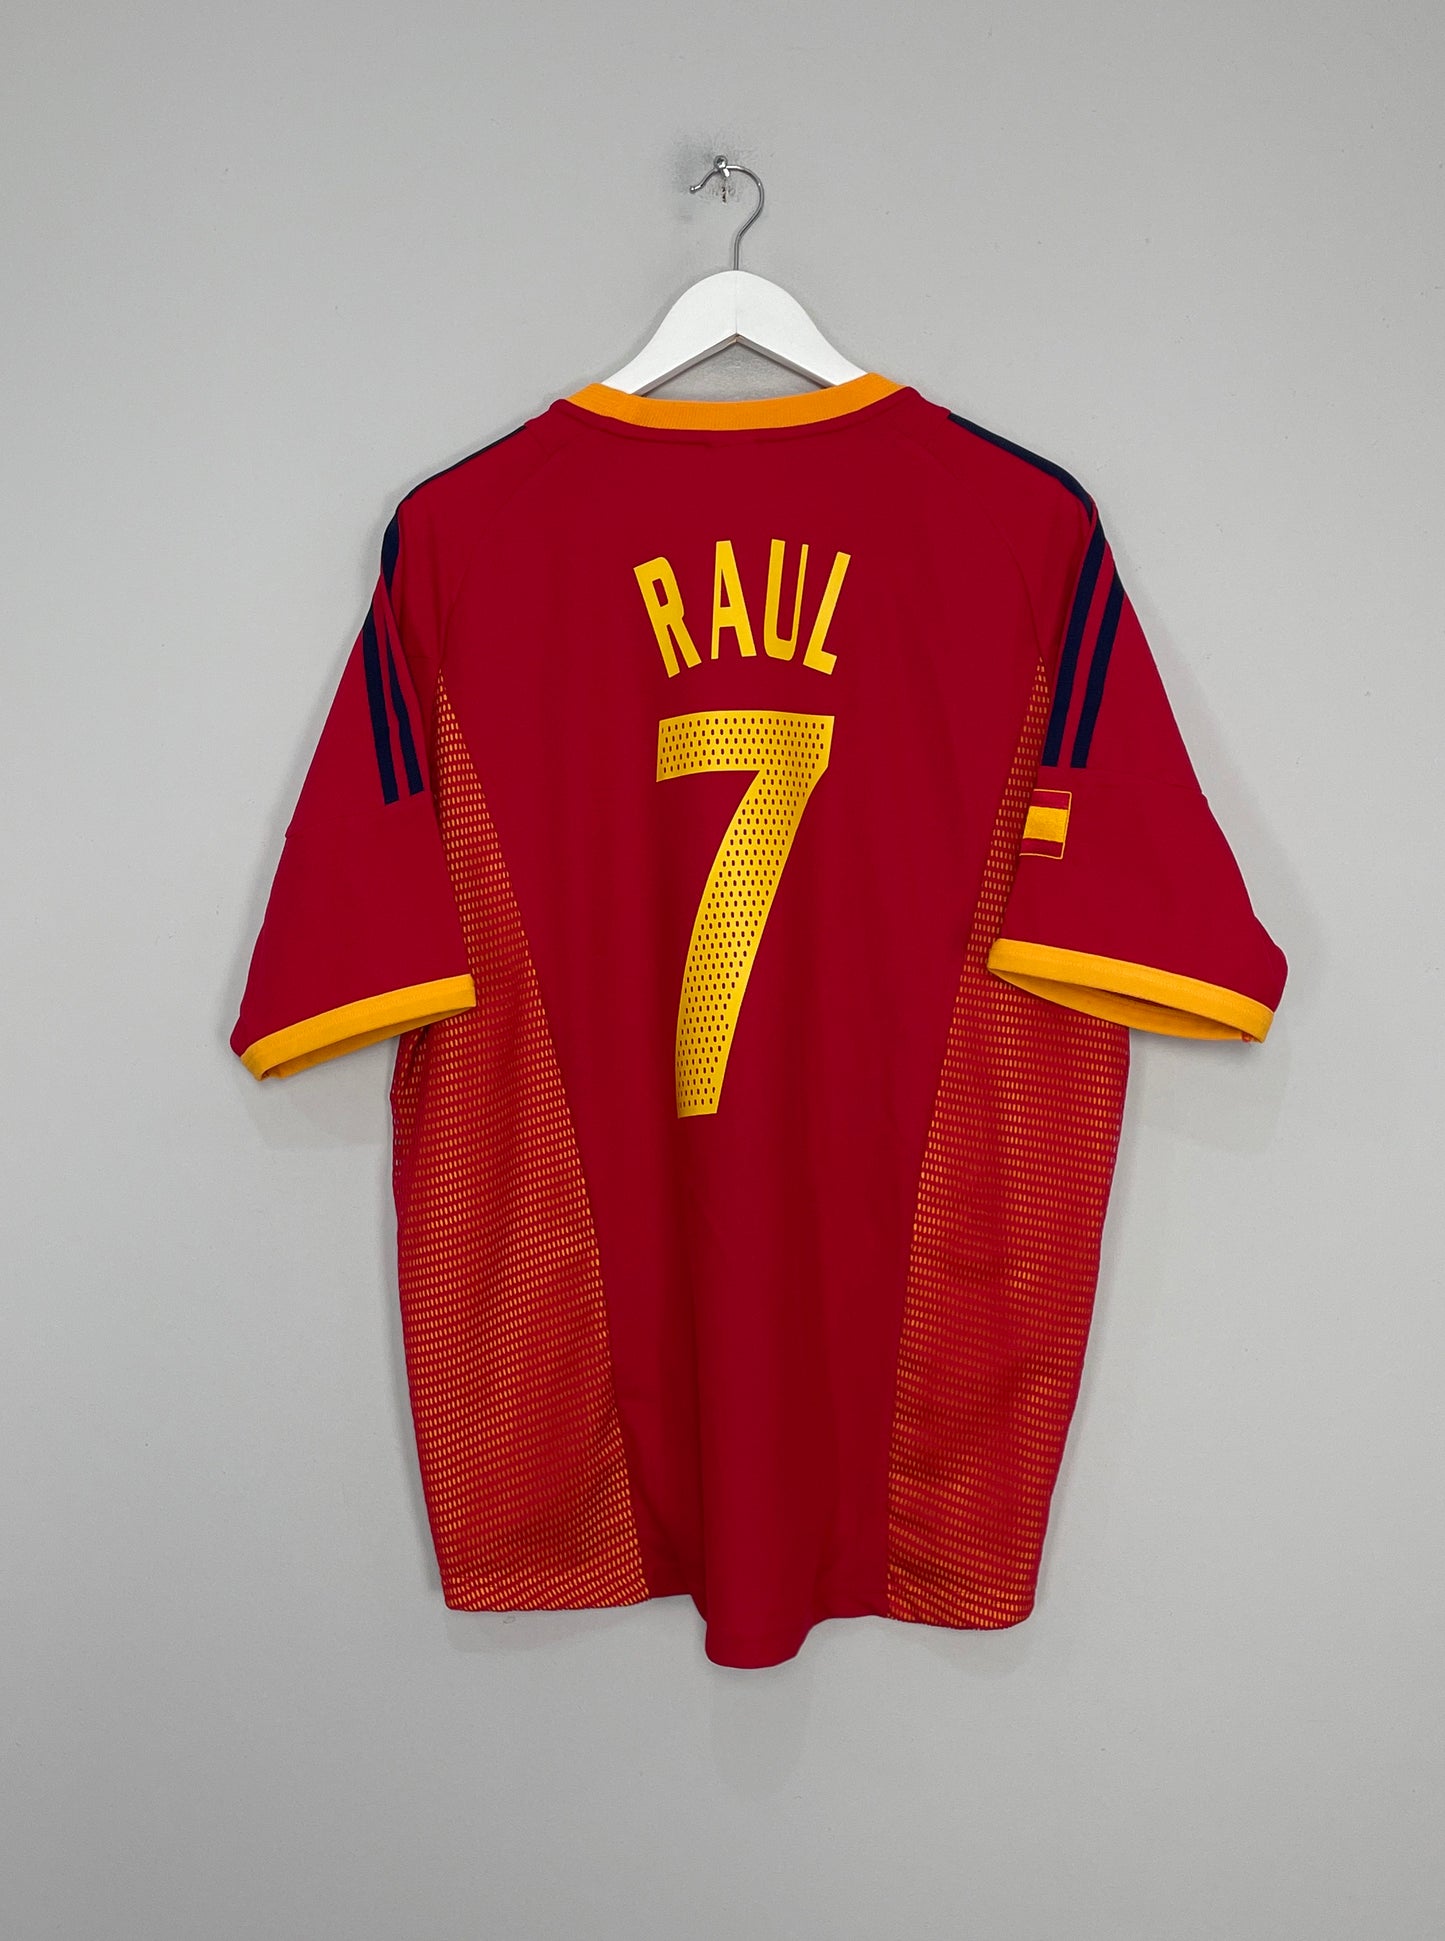 Image of the Spain Raul shirt from the 2002/04 seaspn